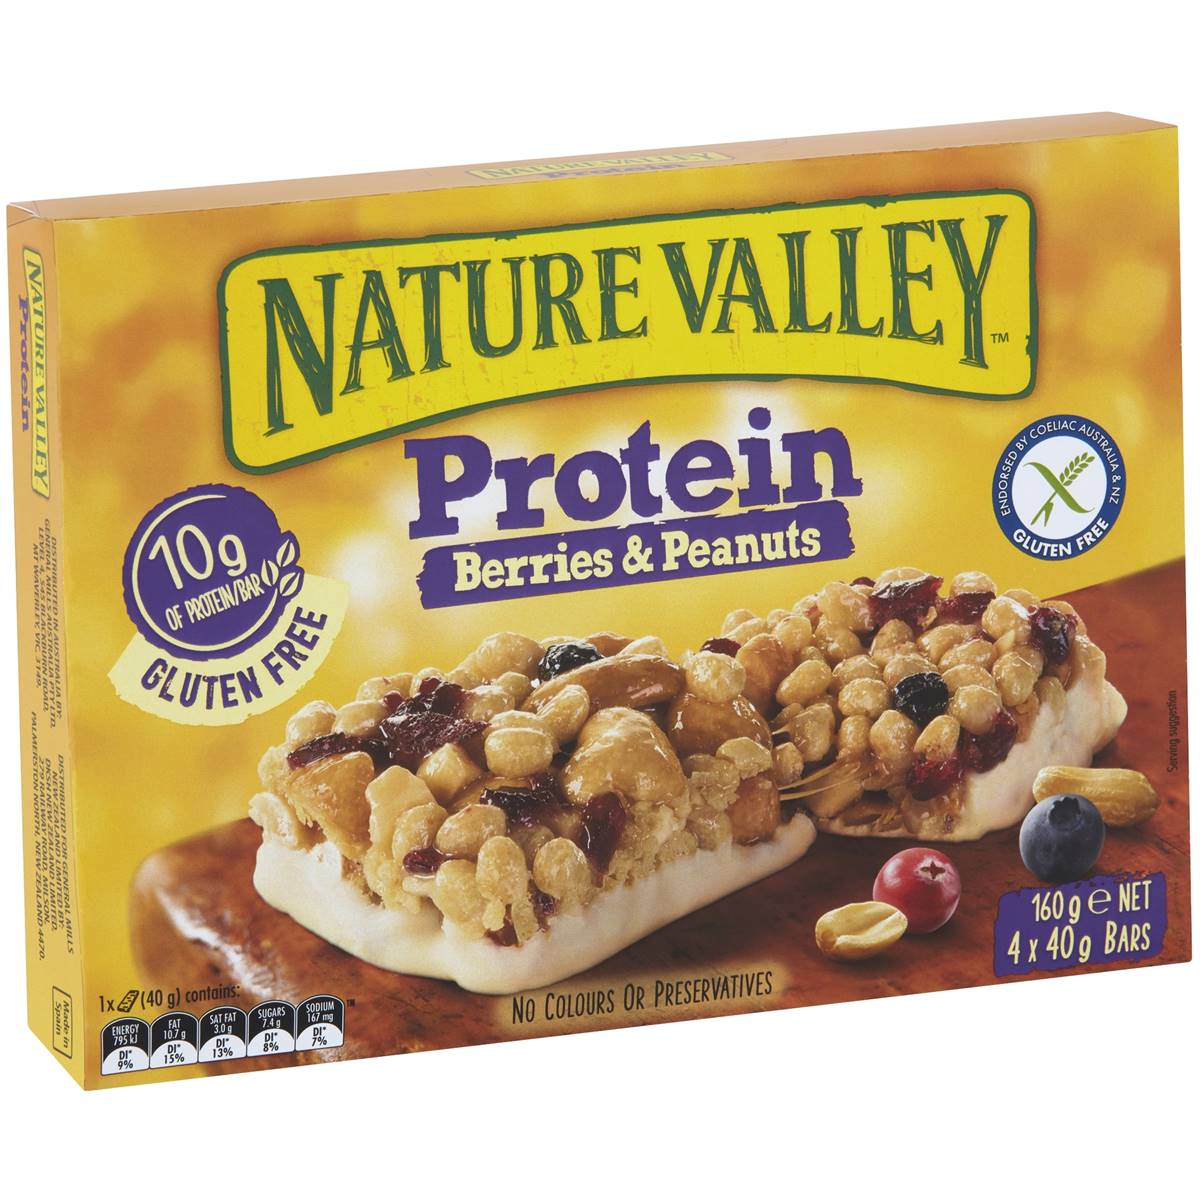 Calories in Nature Valley Gluten Free Protein Bars Berries & Peanuts